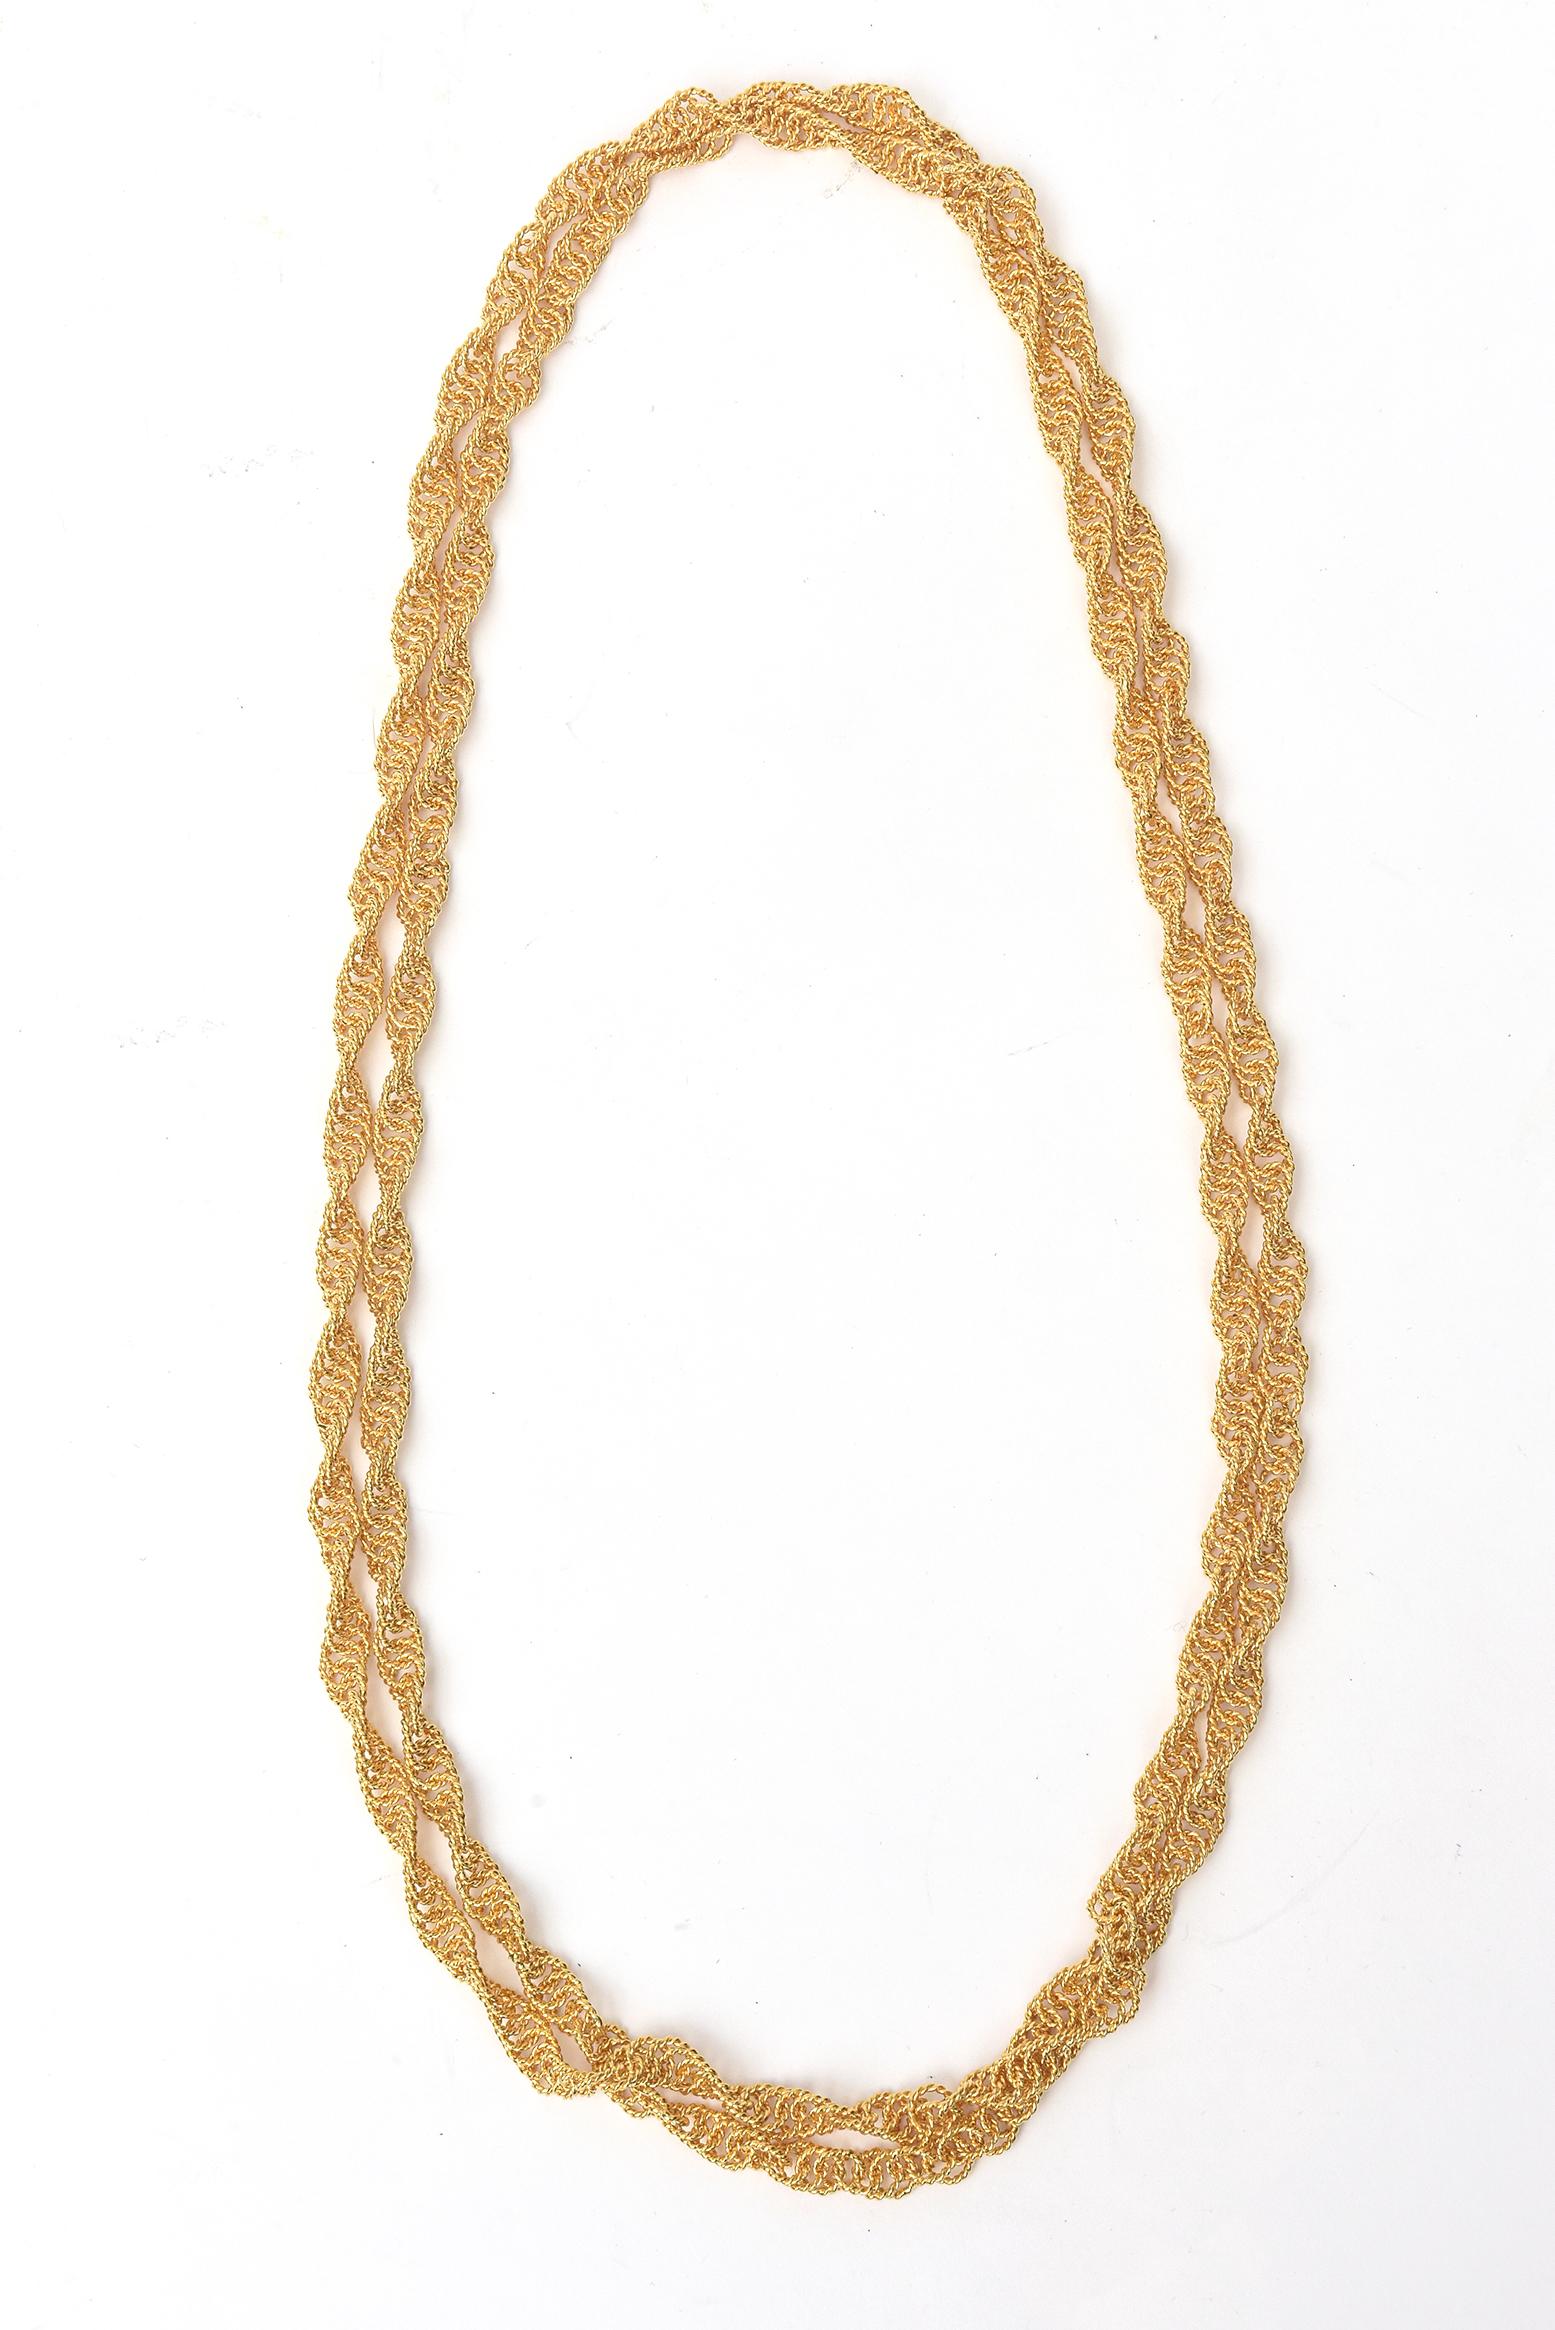 This fabulous long 1960's spiral chain wrap necklace is all gold plated and very rich looking. It can be worn so many different ways as a choker wrapped many times over or doubled or tripled on ones neck. It can be dressed up or down. The links are